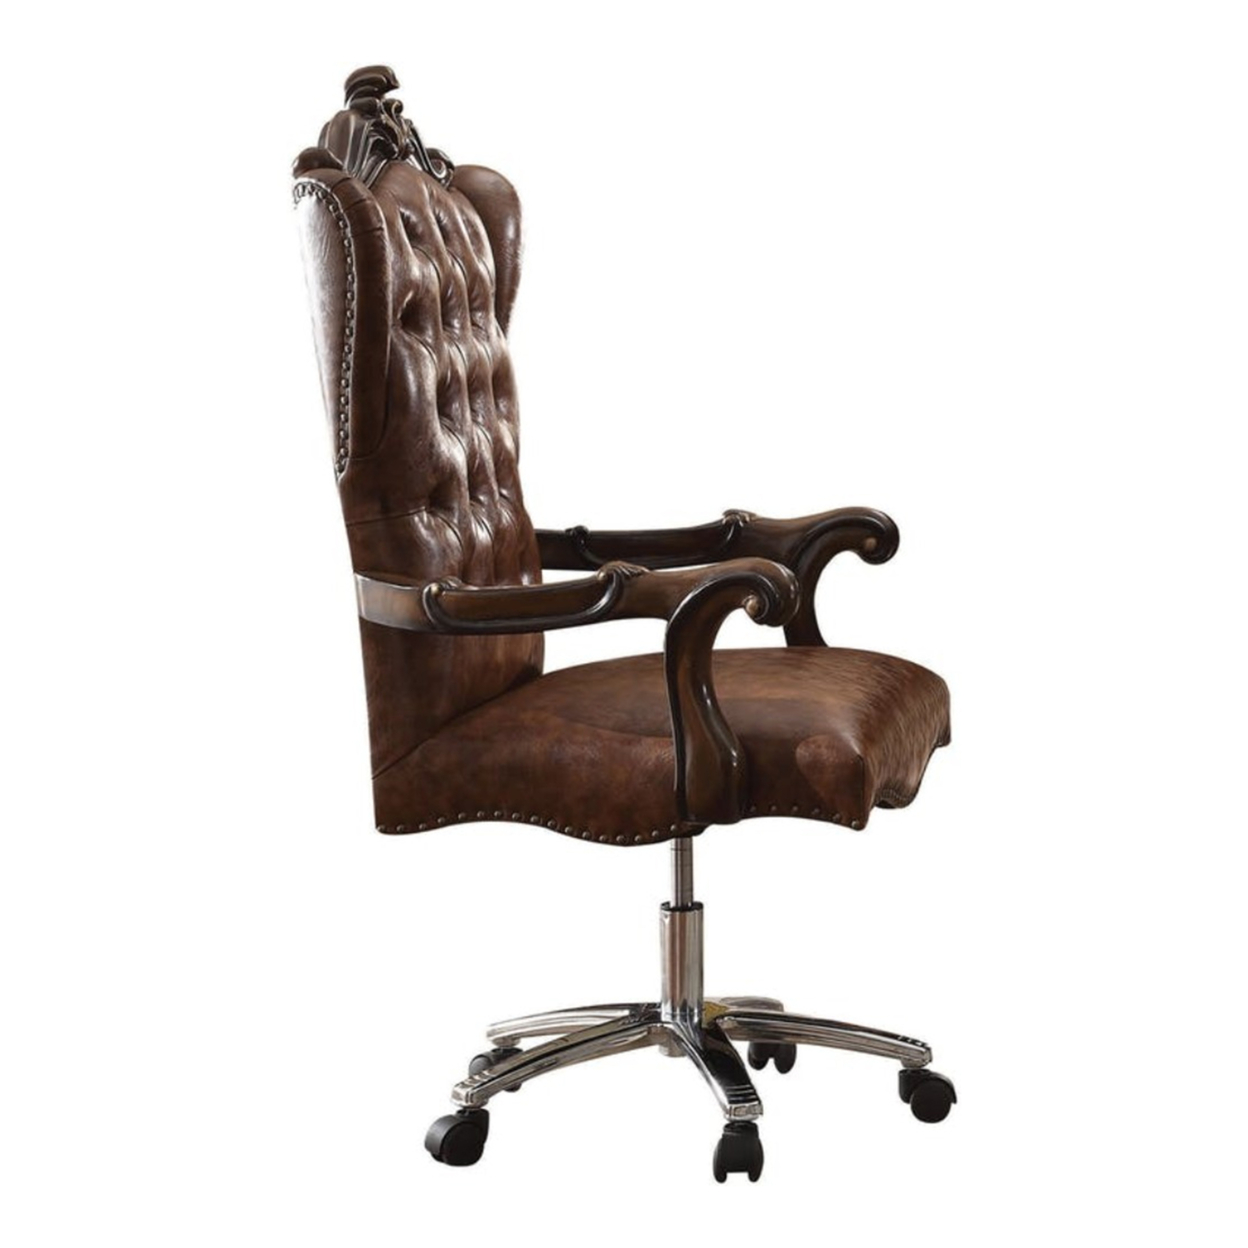 Faux Leather Upholstered Wooden Executive Chair With Swivel, Cherry Oak Brown- Saltoro Sherpi